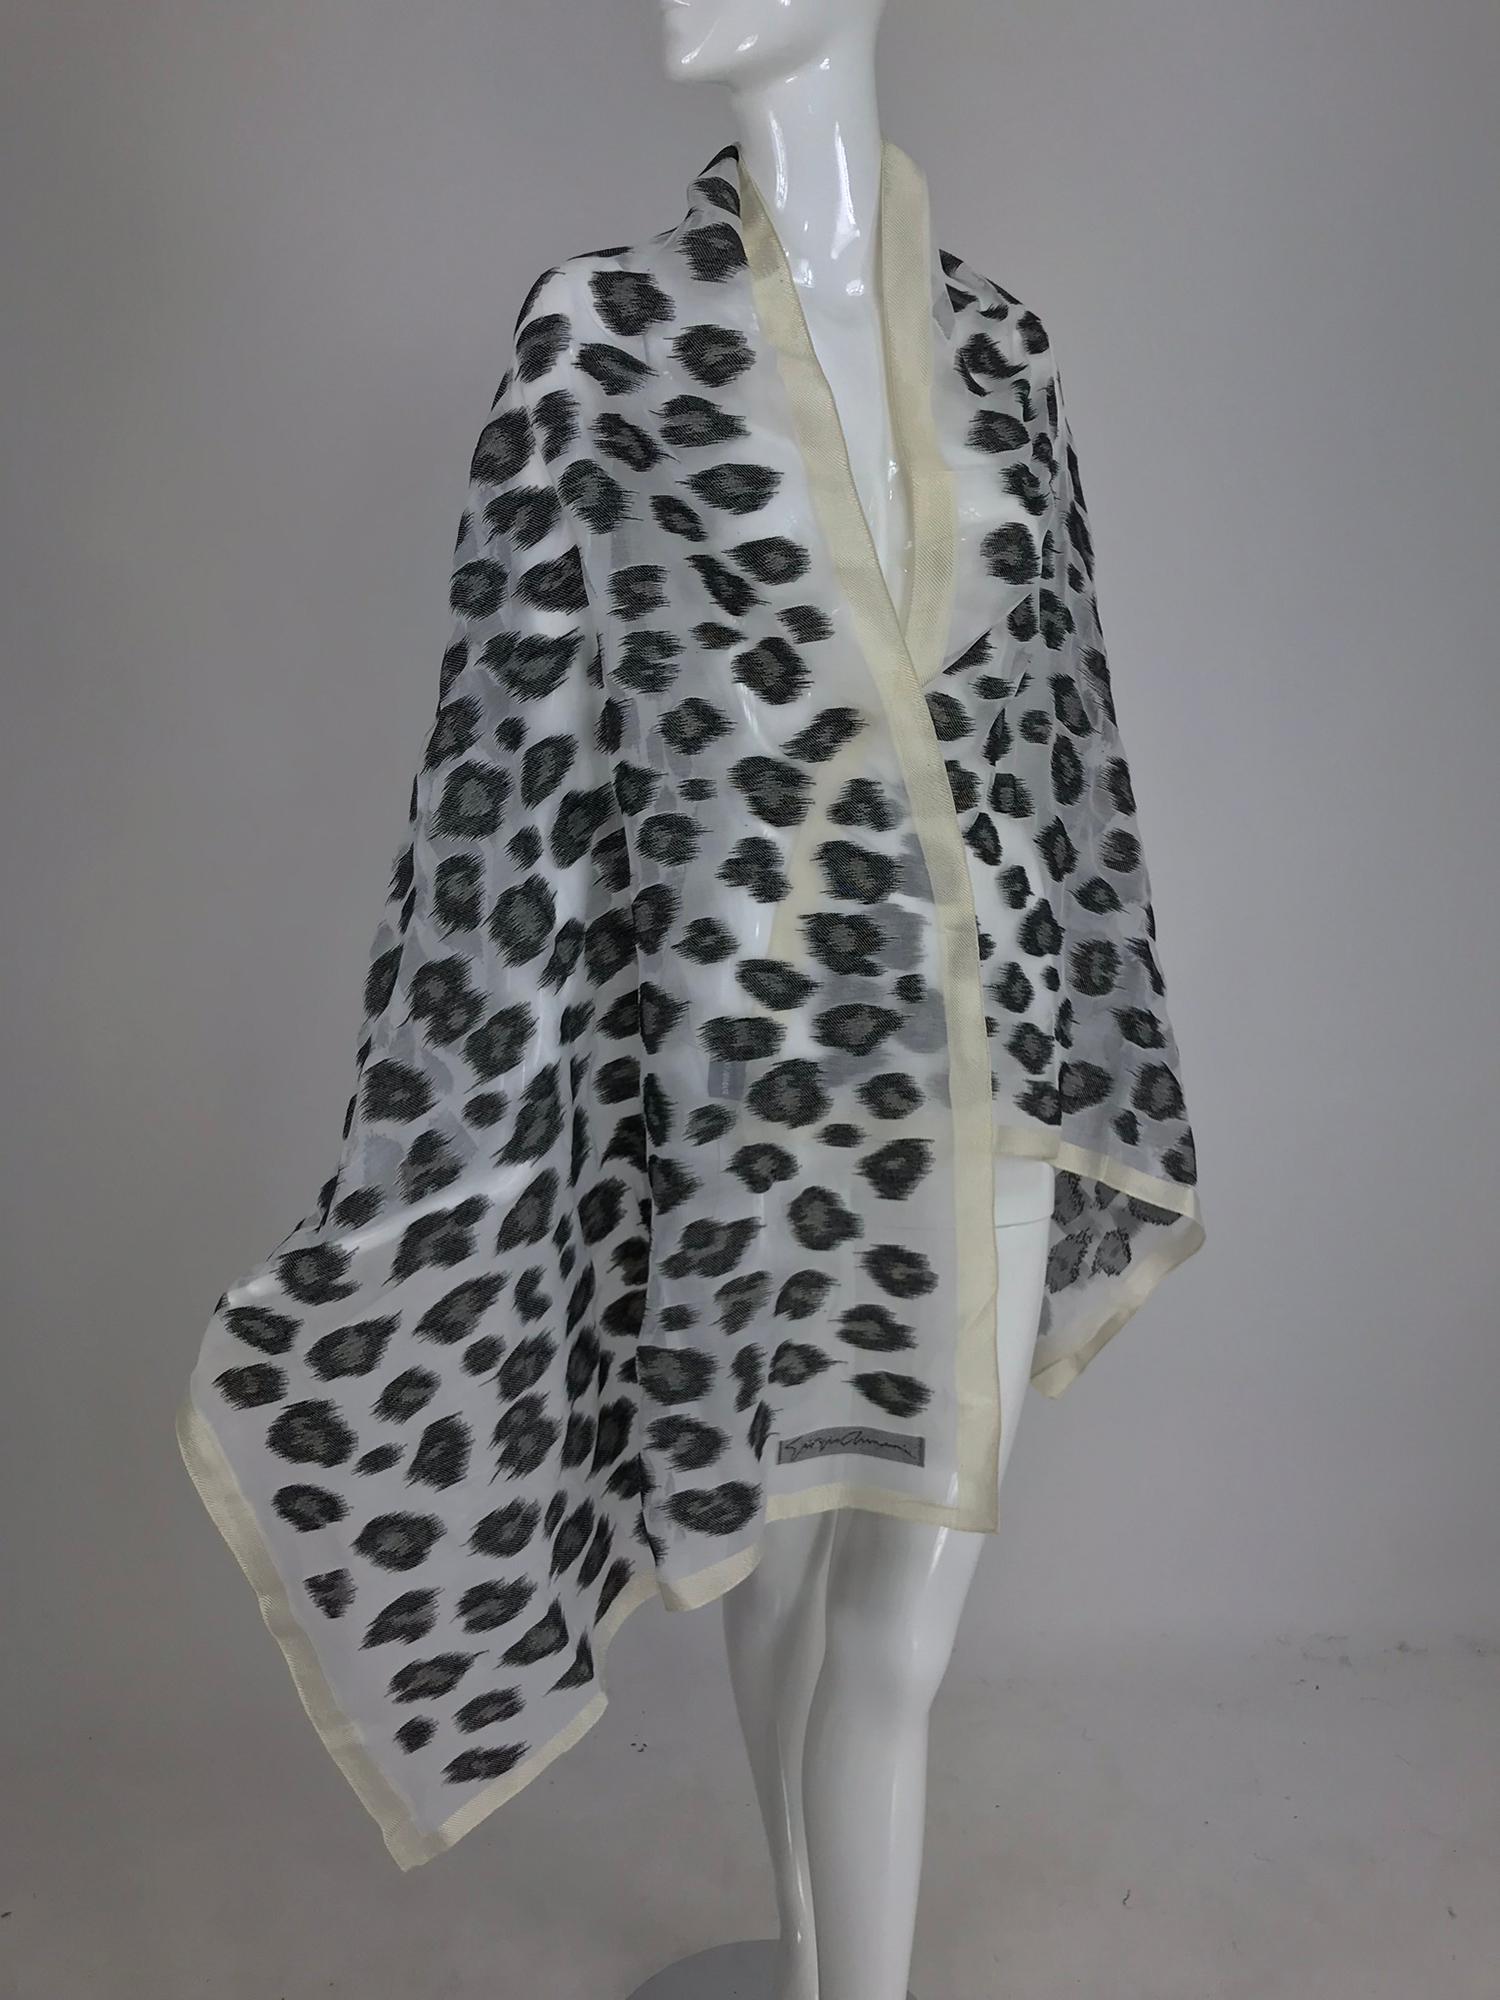 Giorgio Armani large sheer cream and woven black silk leopard spot shawl. The perfect evening wrap. Approximately 29 1/2